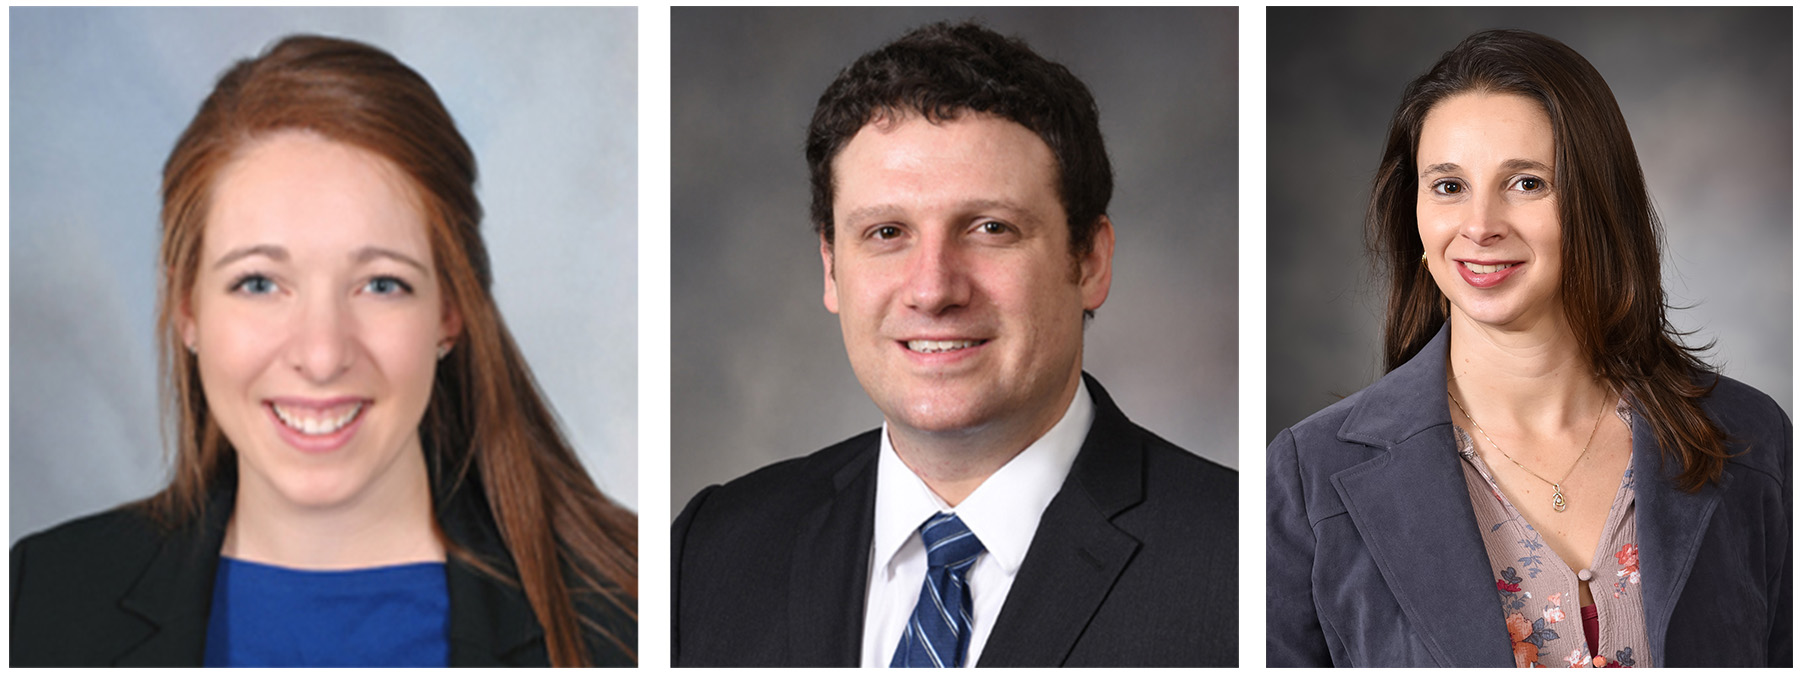 New funding for PIs Dr. Brittany Levy, Dr. Eric Rellinger, and Dr. Marlene Starr have kicked off FY 24 research